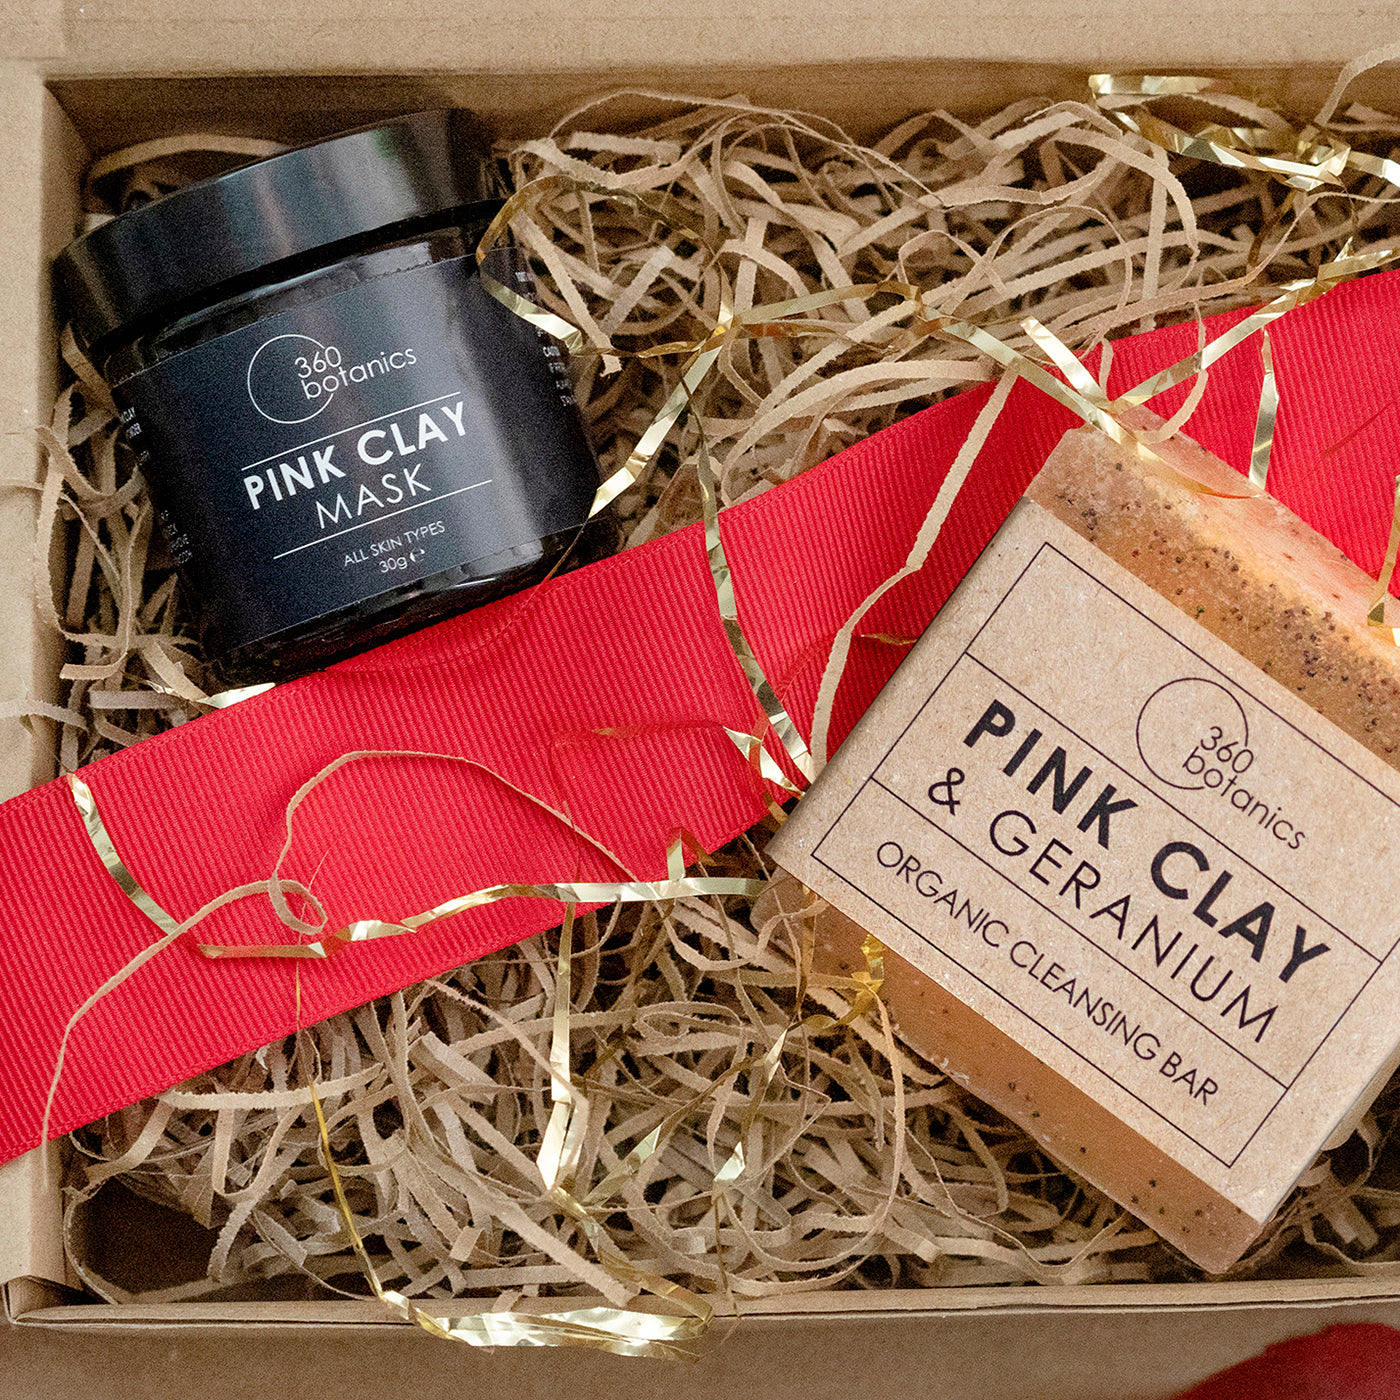 A gift box containing 360 Botanics Pink Clay Mask and Pink Clay & Geranium Organic Cleansing Bar, adorned with red ribbon and natural wood shavings, presenting an elegant skincare set.